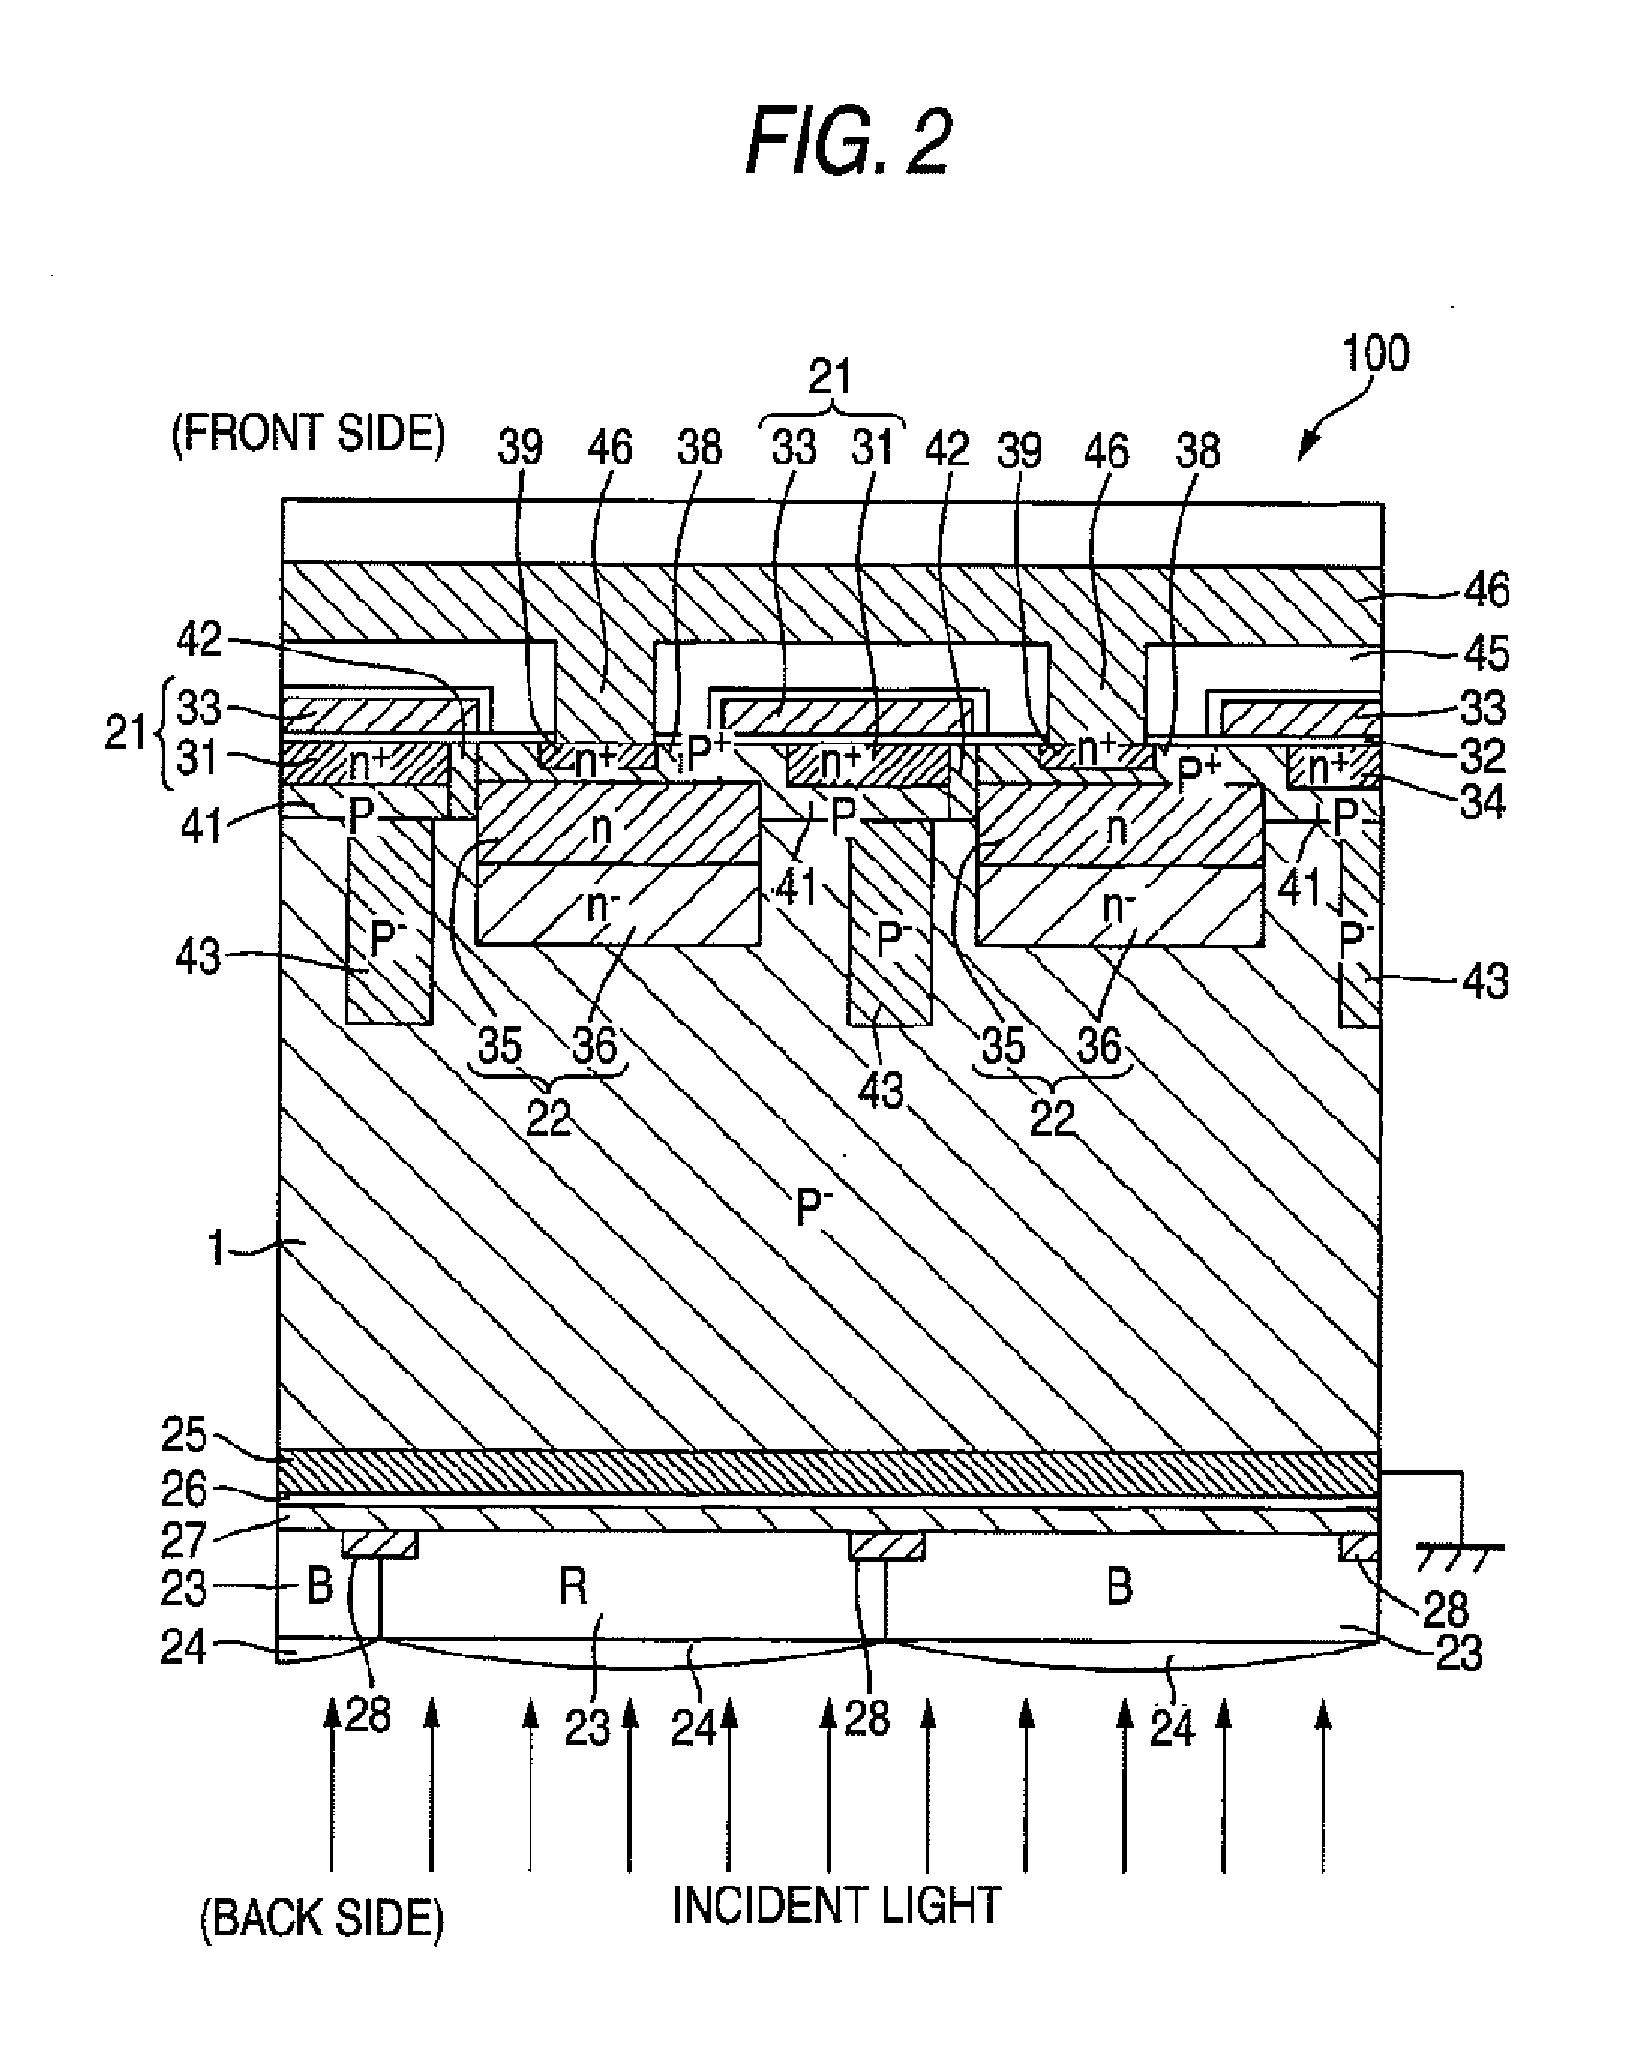 Backside illuminated solid-state imaging device